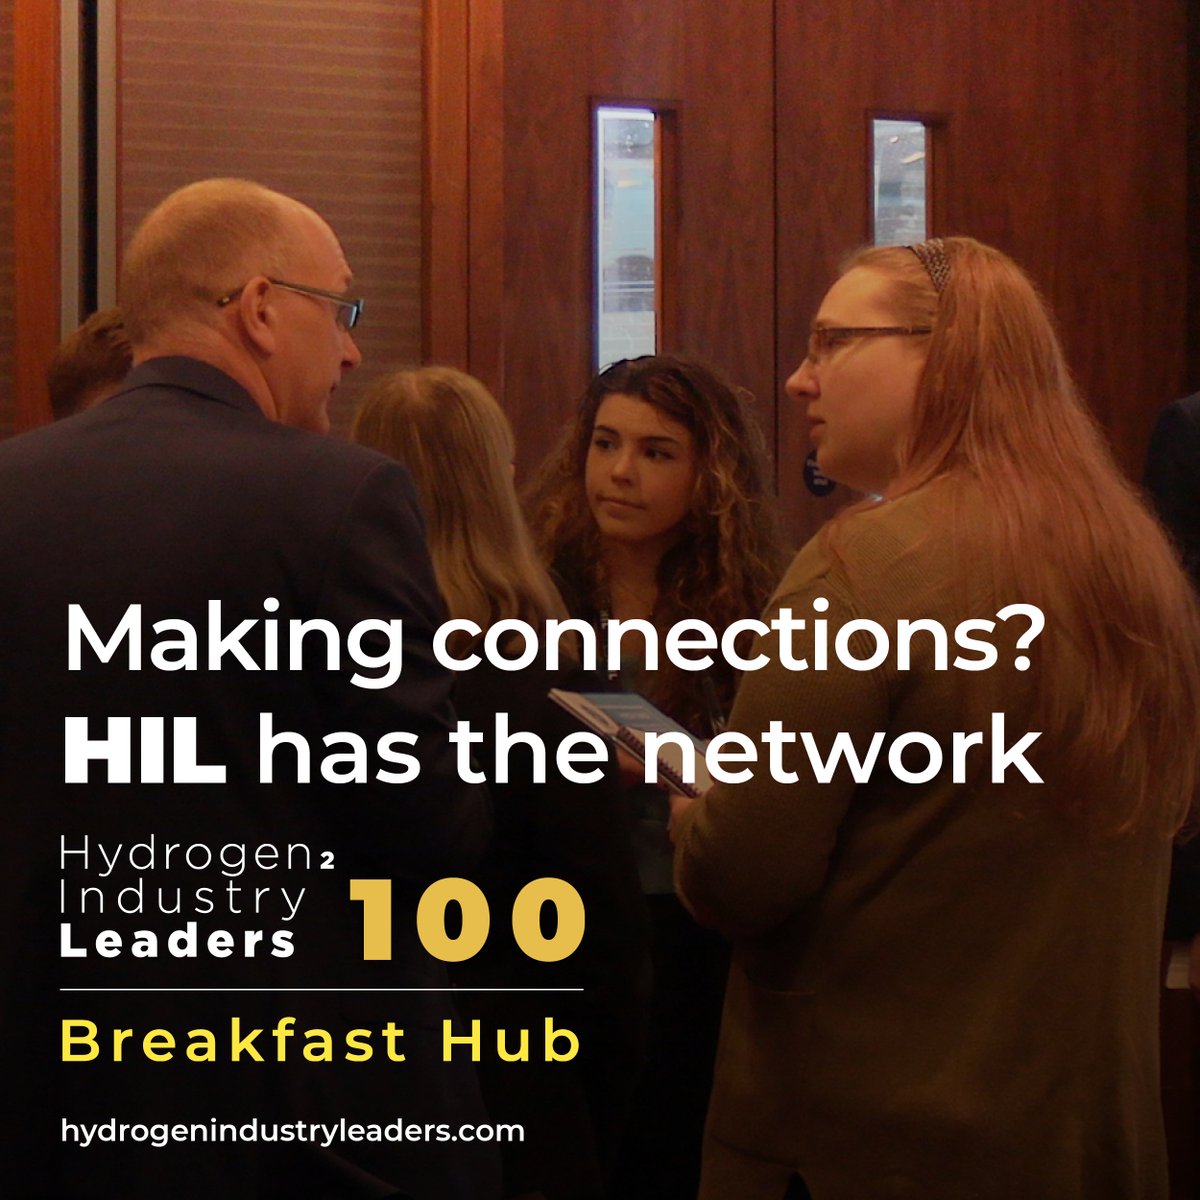 Join us at HIL Manchester! ⚡

🔗 Secure your spot today: ow.ly/7ftB50PGKLq

#H2Leaders #HydrogenEconomy #HydrogenIndustry #EnergyTransition #Energy #HydrogenEvent #EnergyEvent #Networking #NetworkingEvent #ManchesterEnergy #ManchesterEvent #CleanEnergy